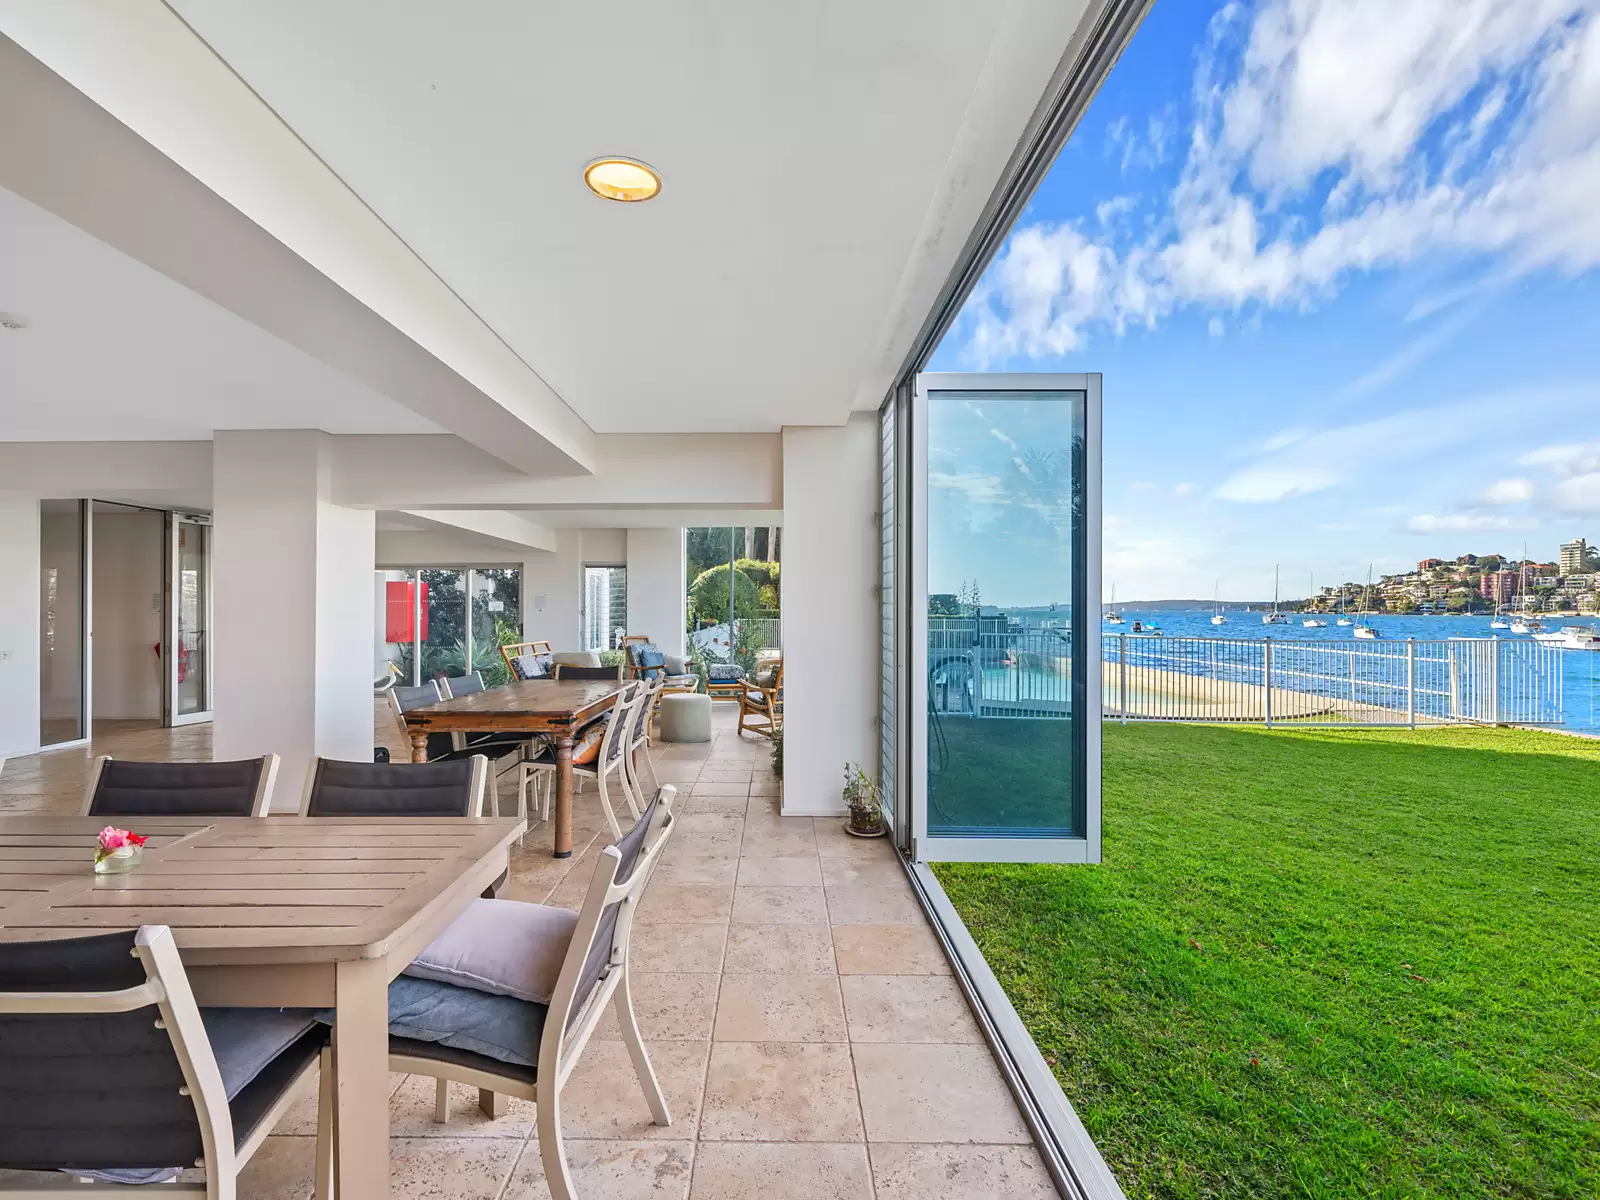 Photo #16: 65/35A Sutherland Crescent, Darling Point - Auction by Sydney Sotheby's International Realty